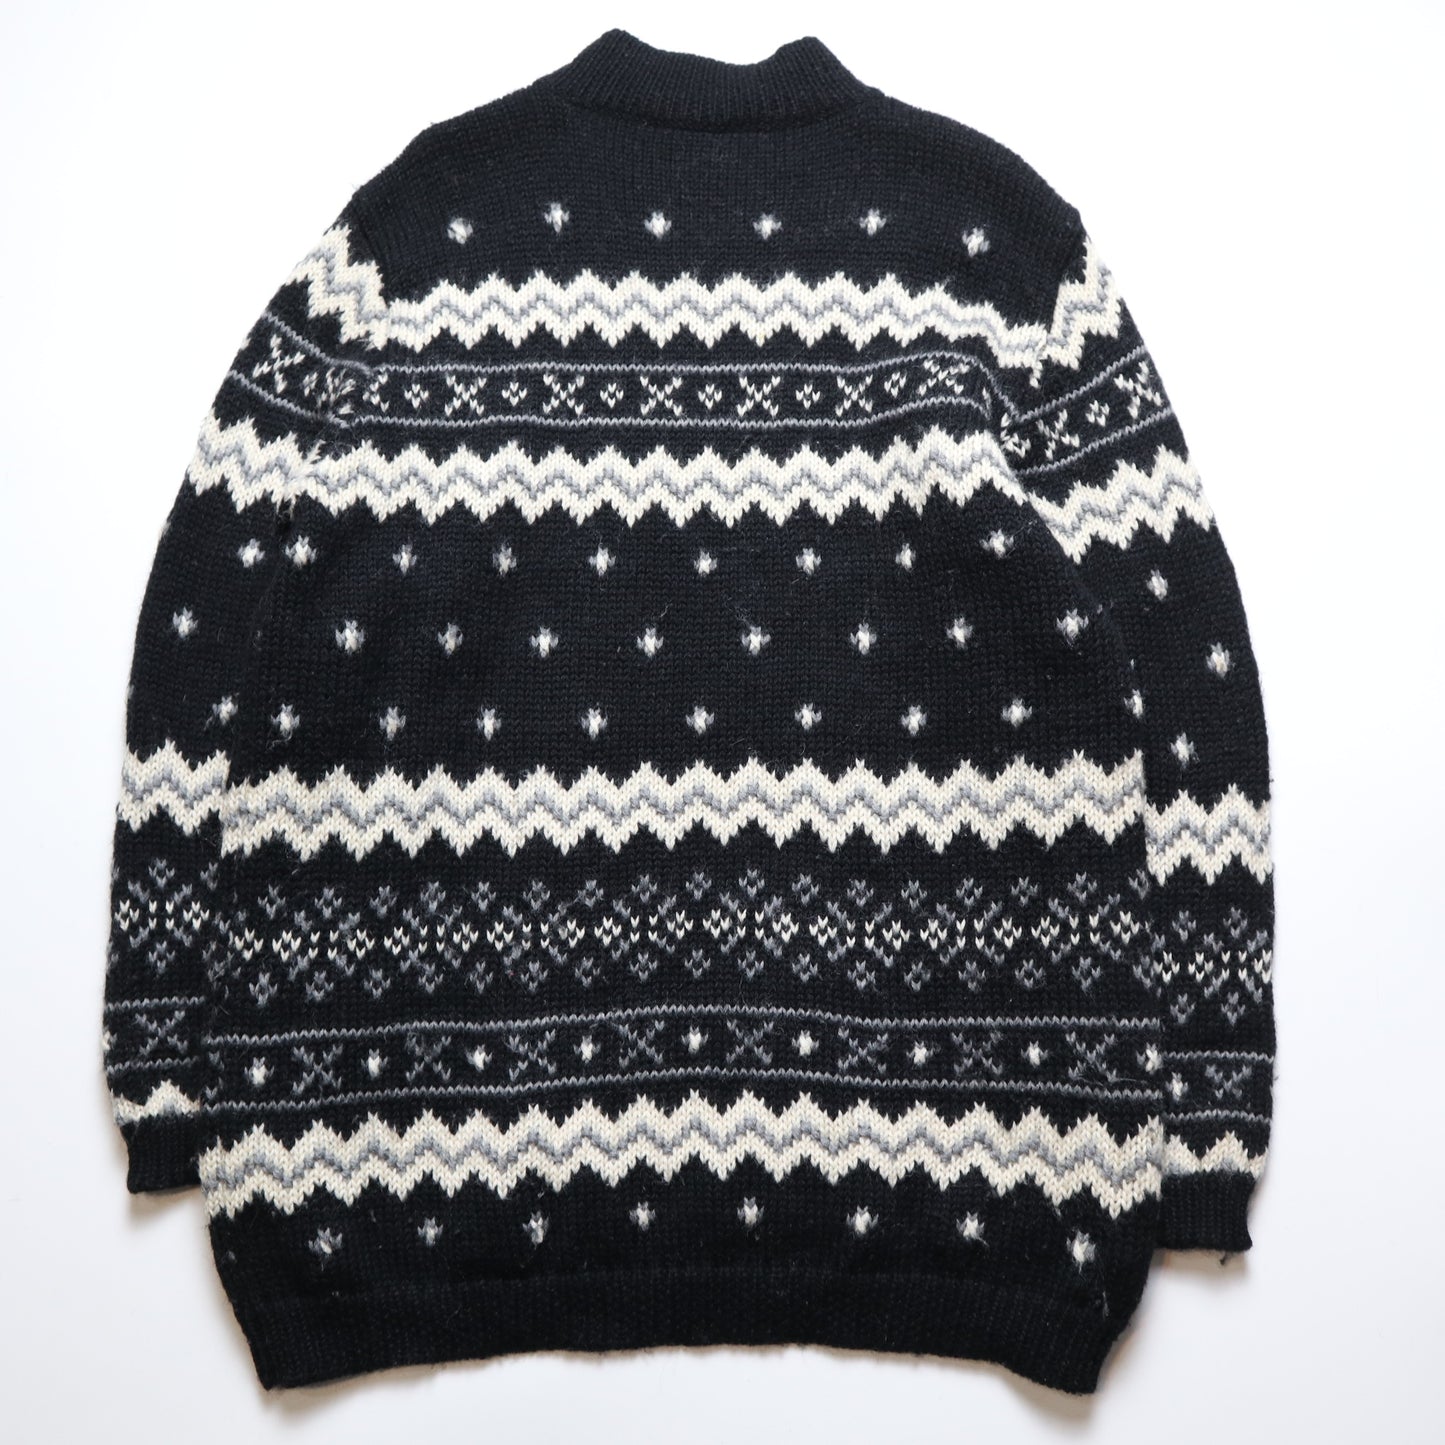 Black and White Totem Wool Knitted Sweater